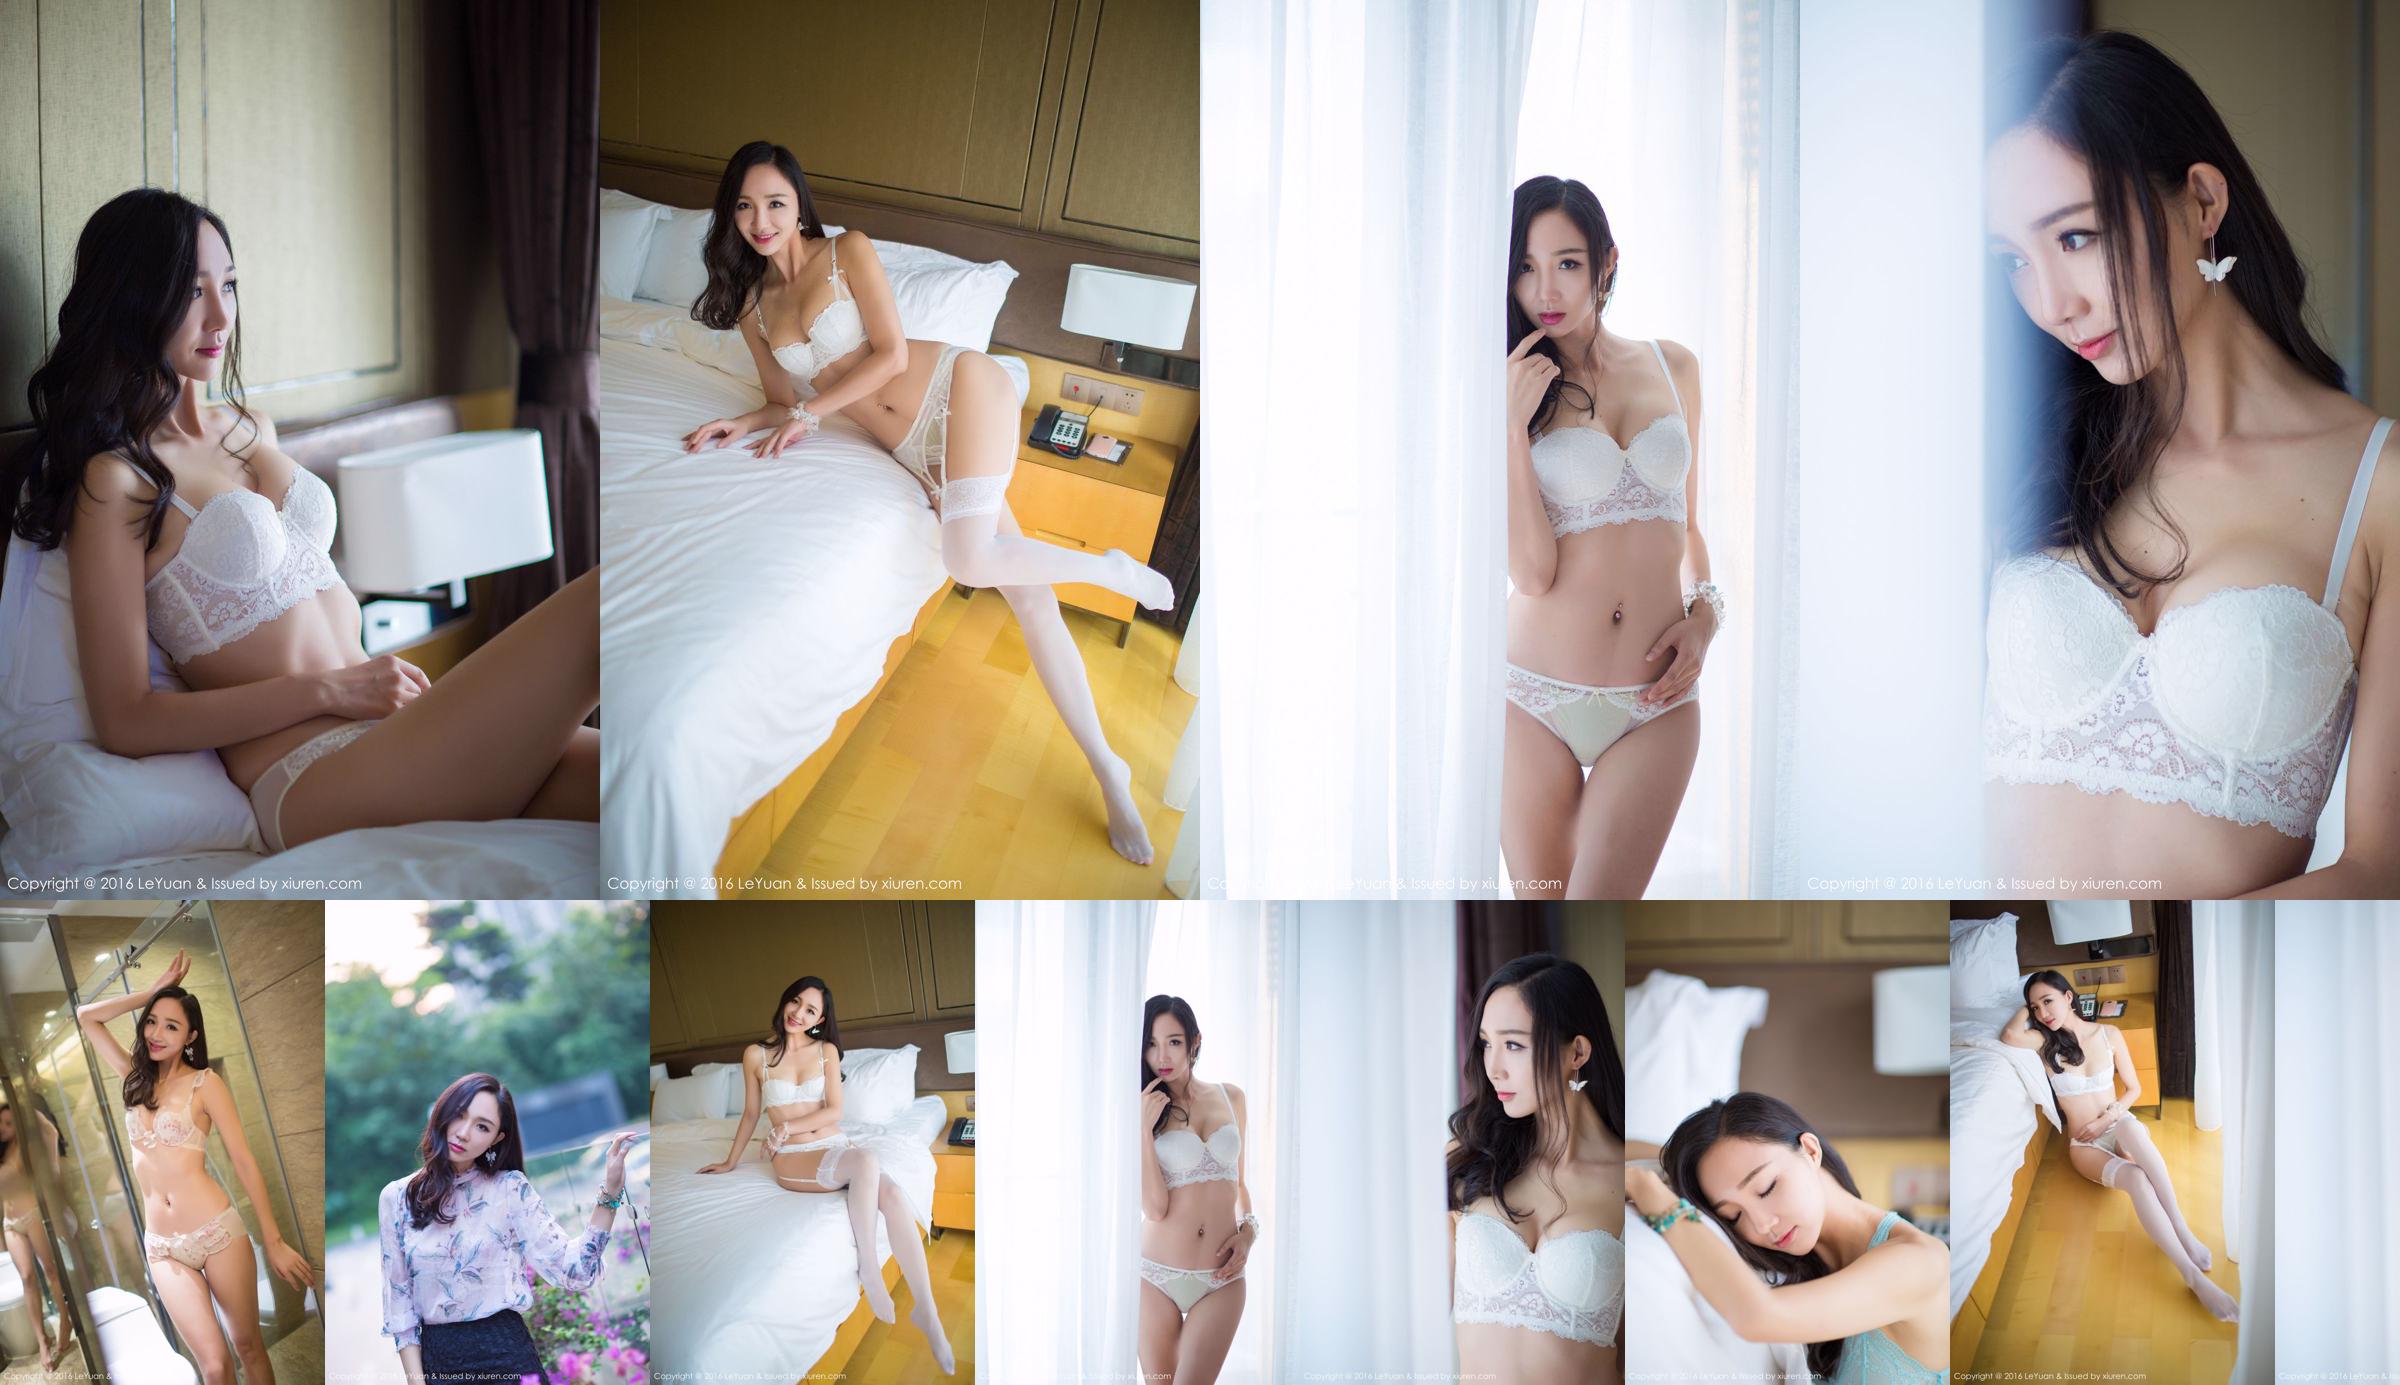 Beibei maggie "Longues belles jambes, grande figure gracieuse" [Star Paradise LeYuan] Vol.009 No.72bbf4 Page 7